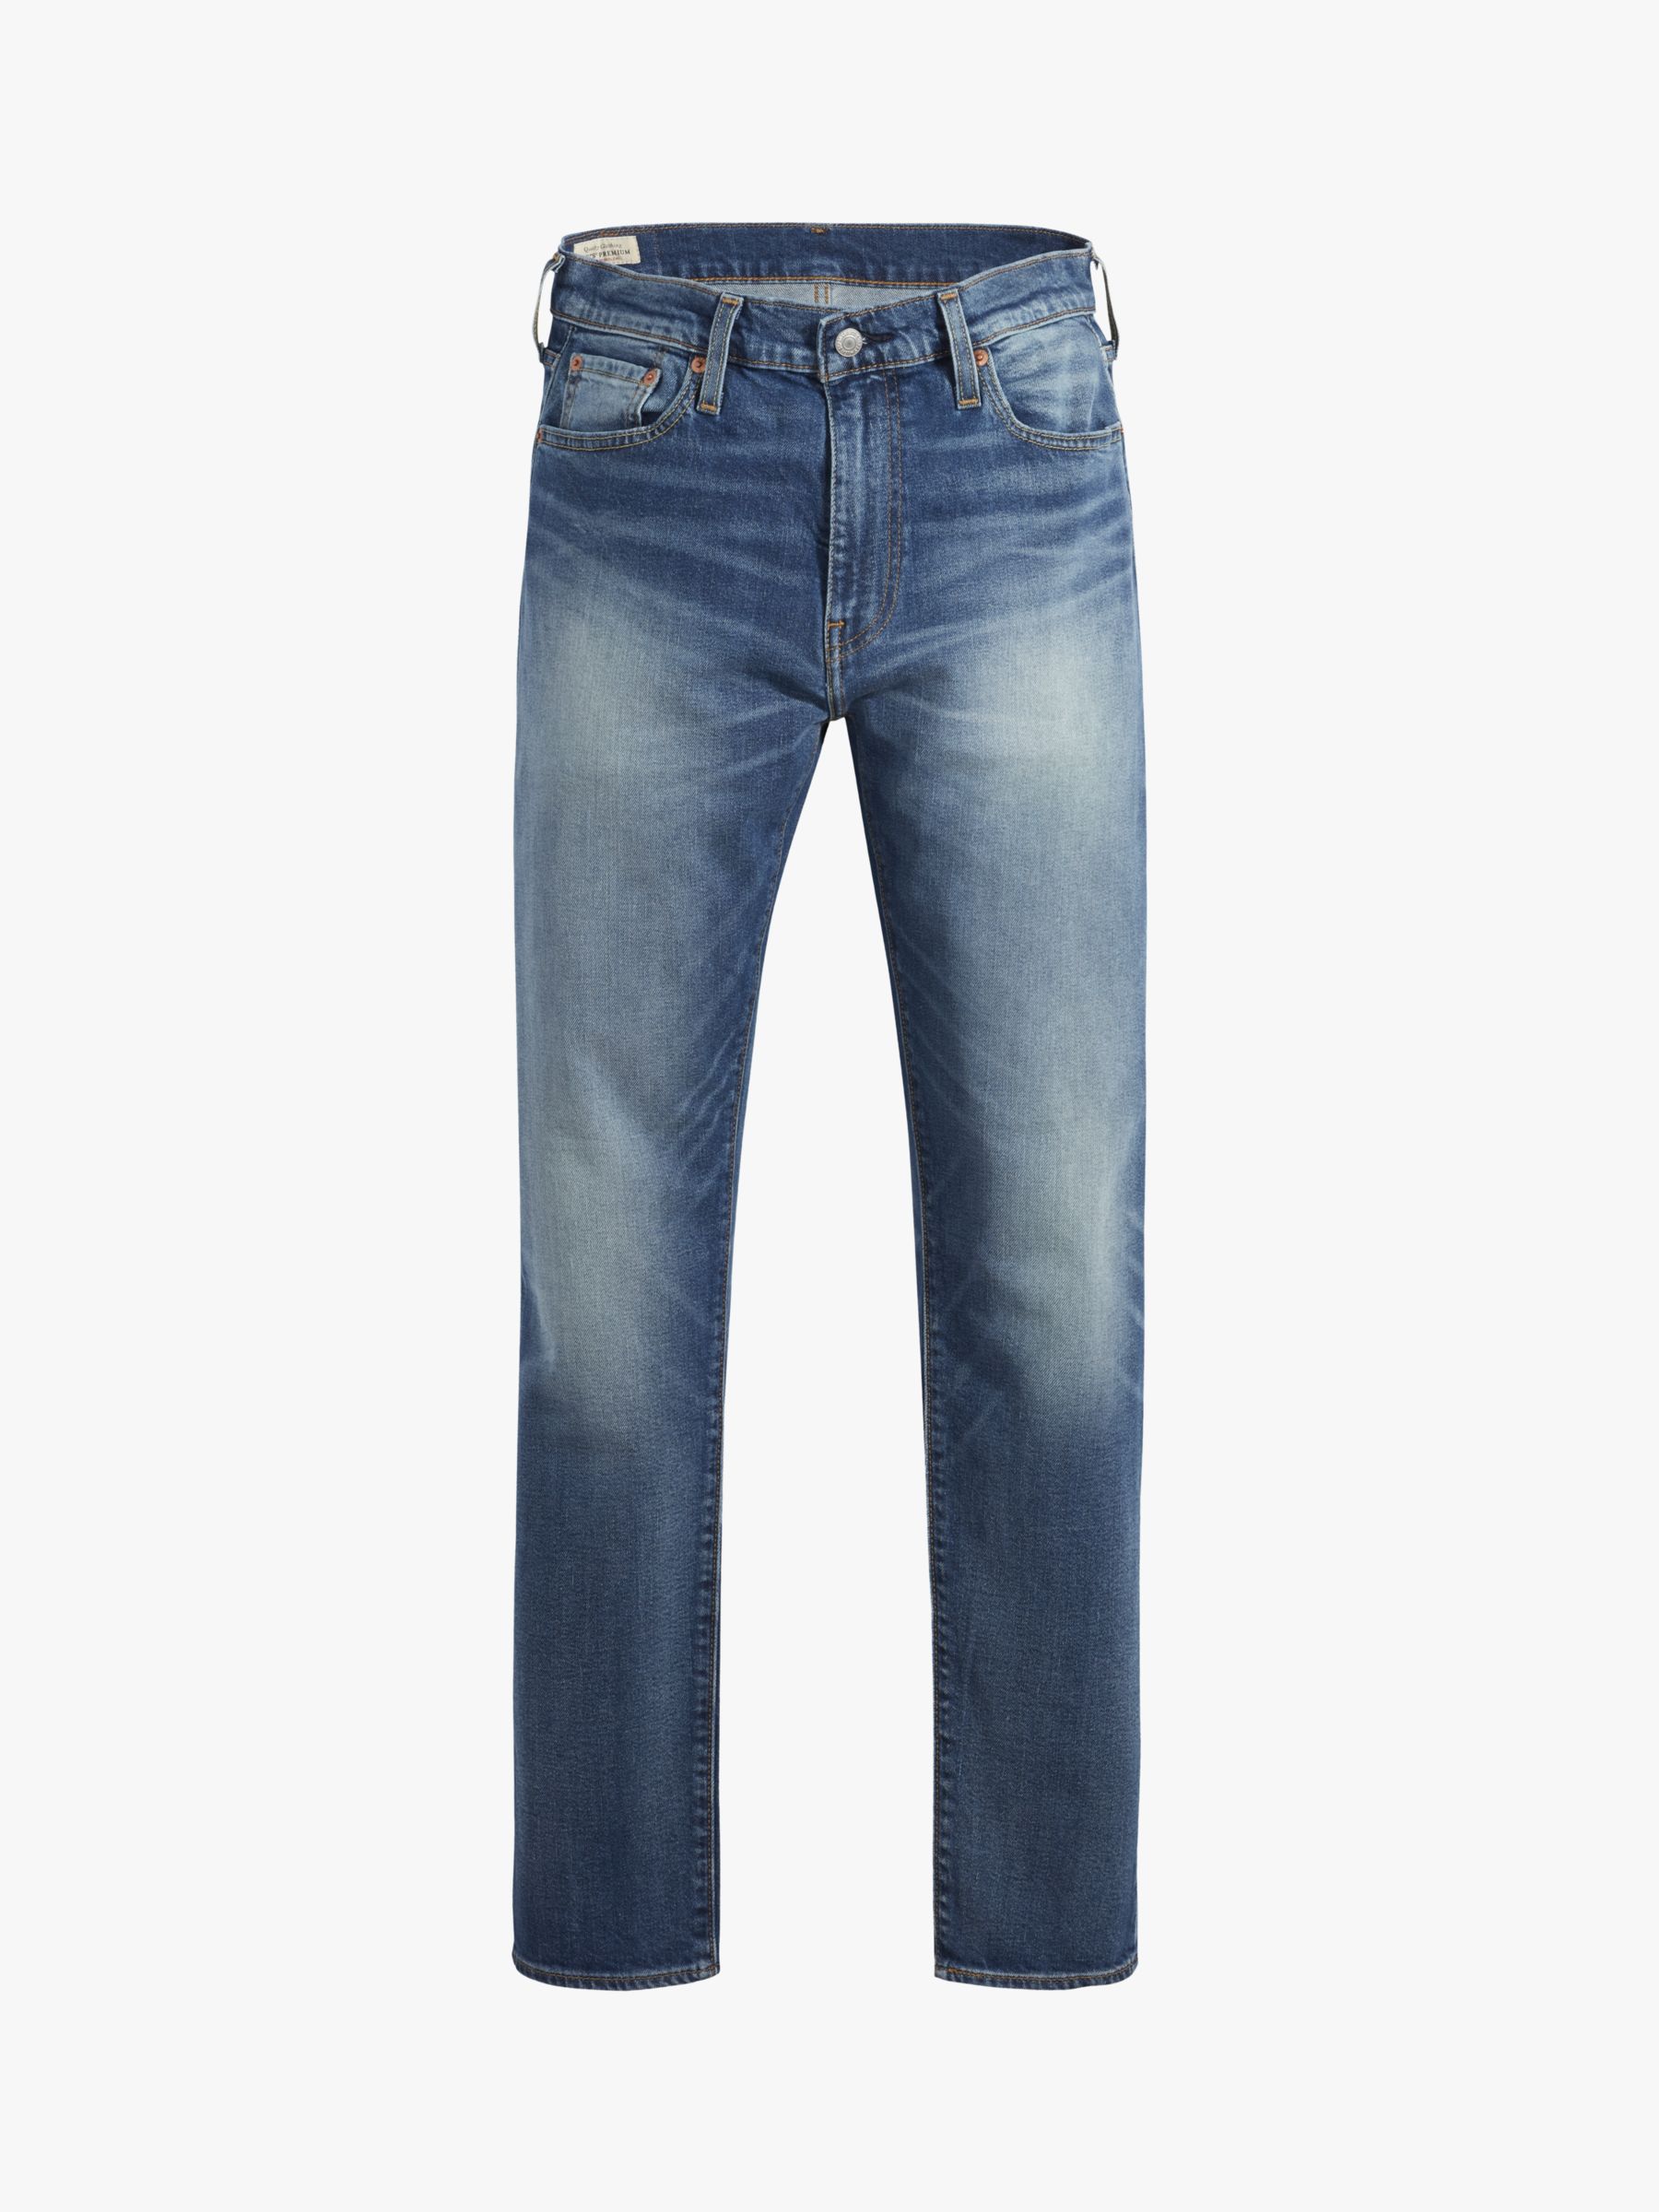 Levi's 512 Slim Tapered Jeans, Pay Everyday Adv